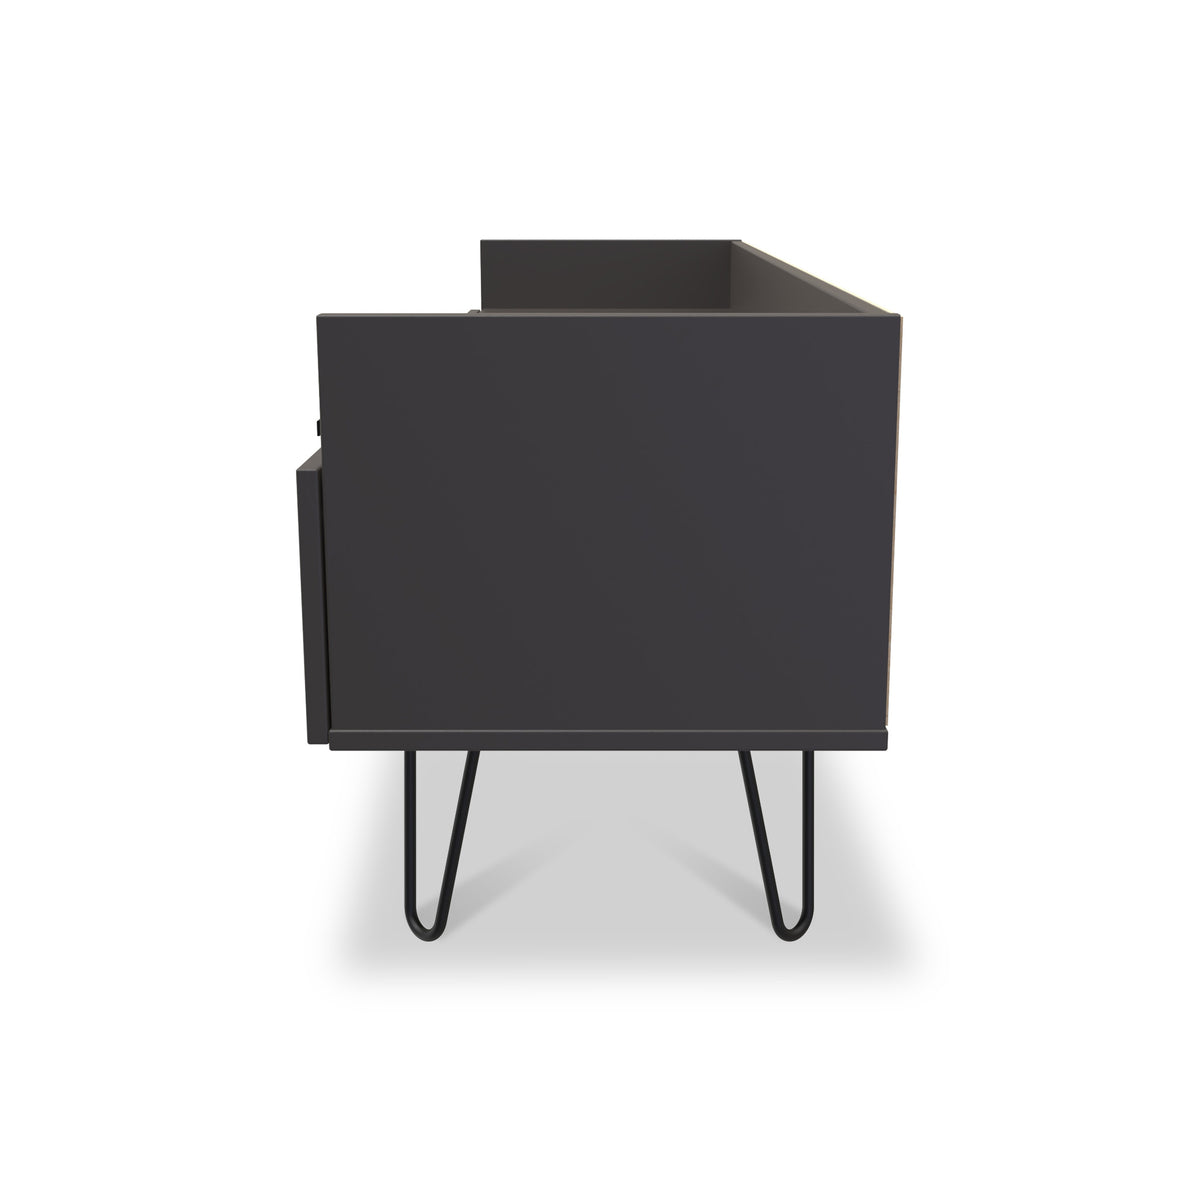 Moreno Graphite Grey 2 Drawer Media Console Unit with  hairpin legs from Roseland Furniture